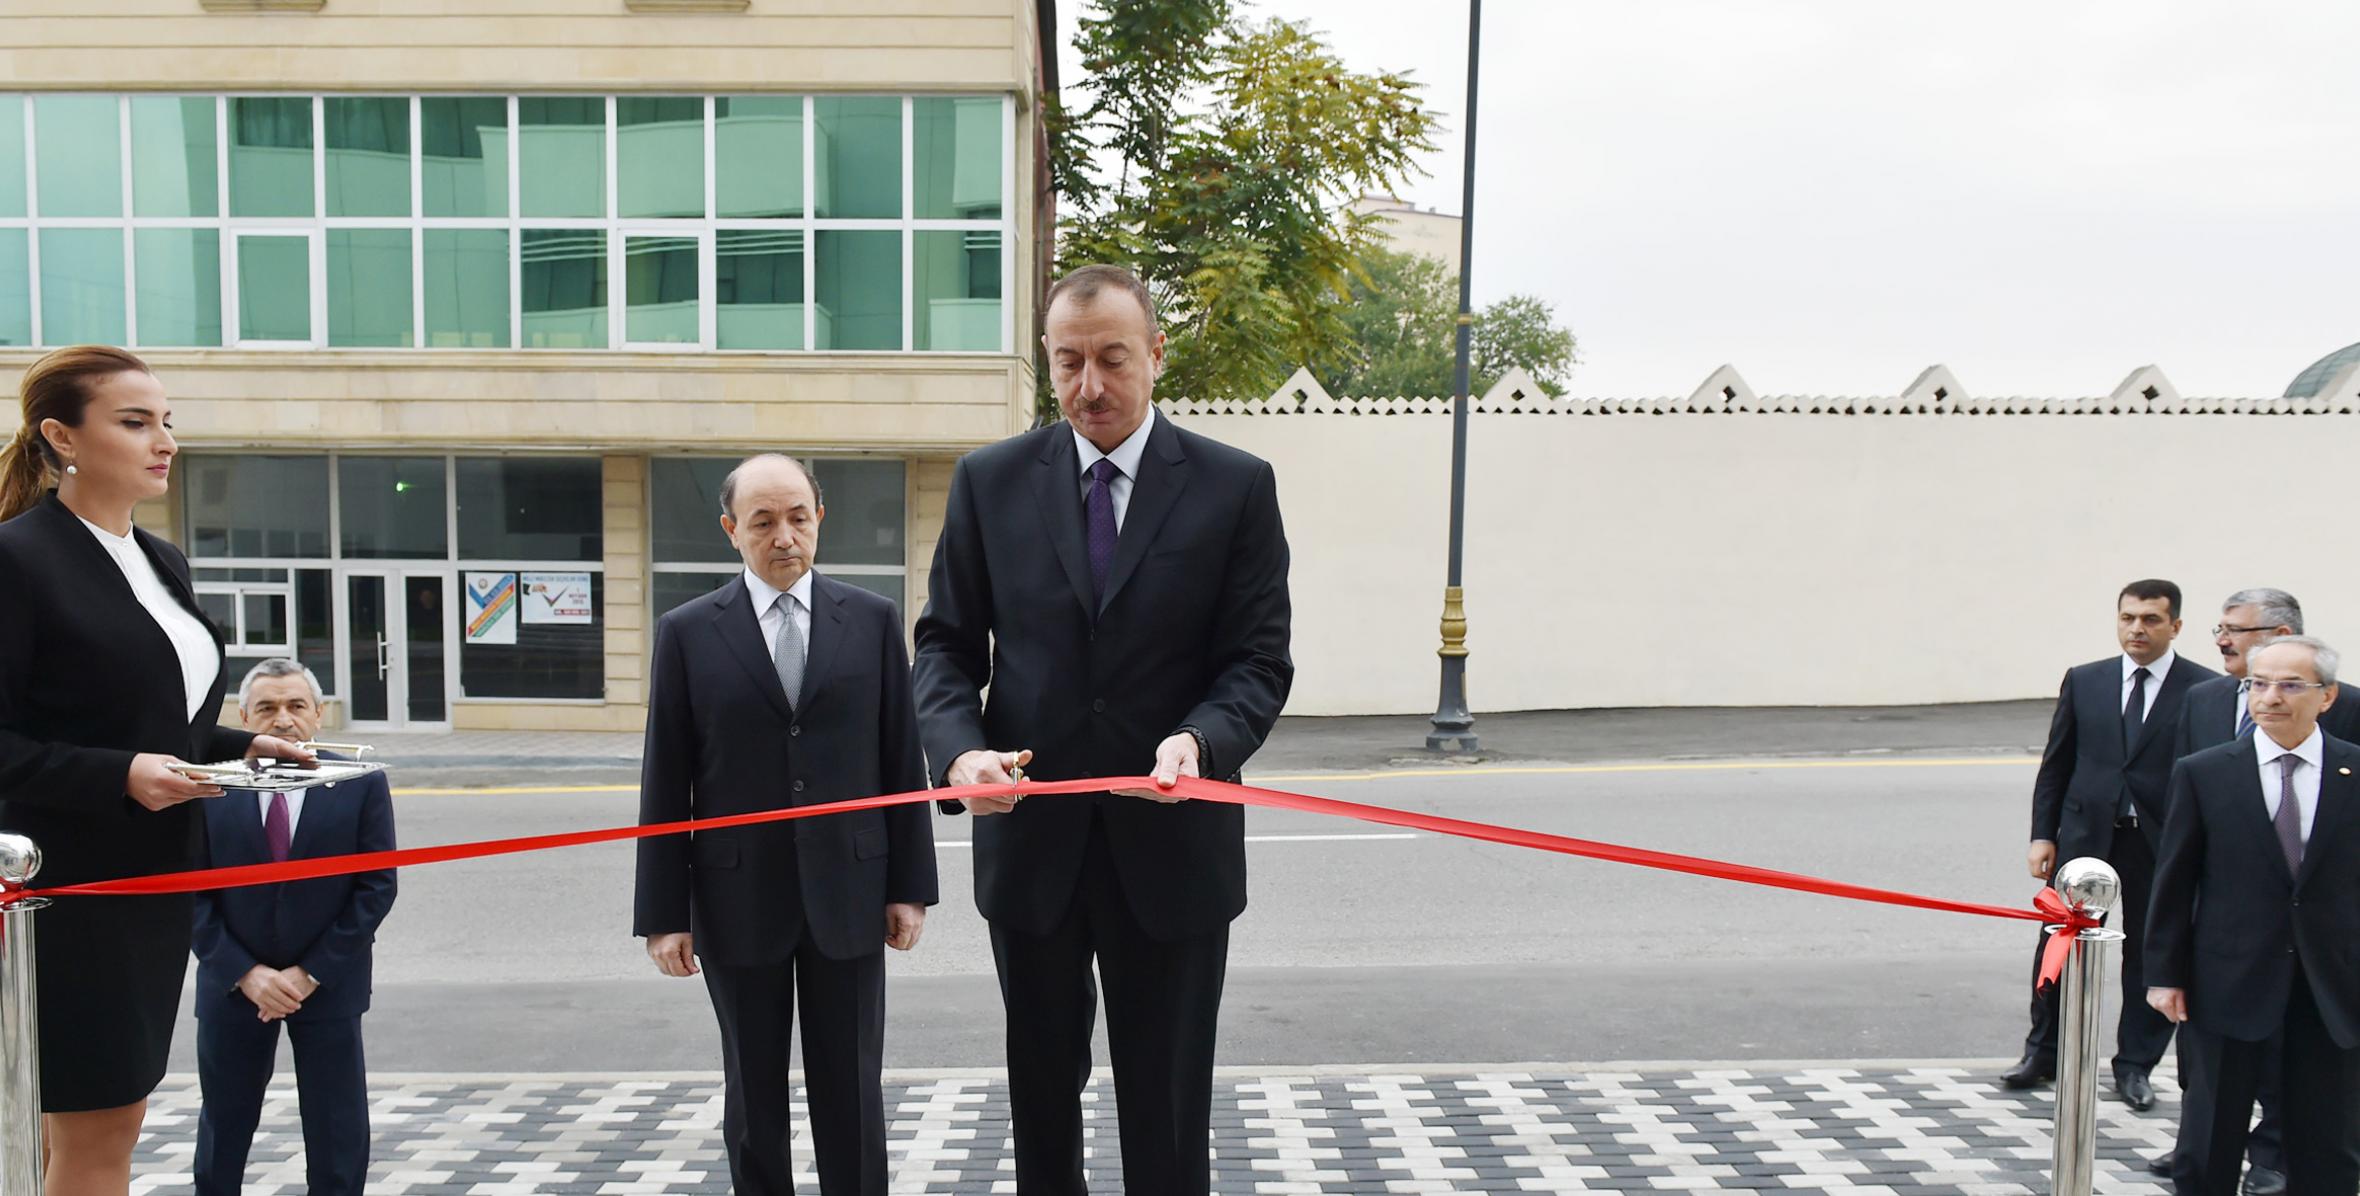 Ilham Aliyev attended the opening of the Sabunchu Court Complex